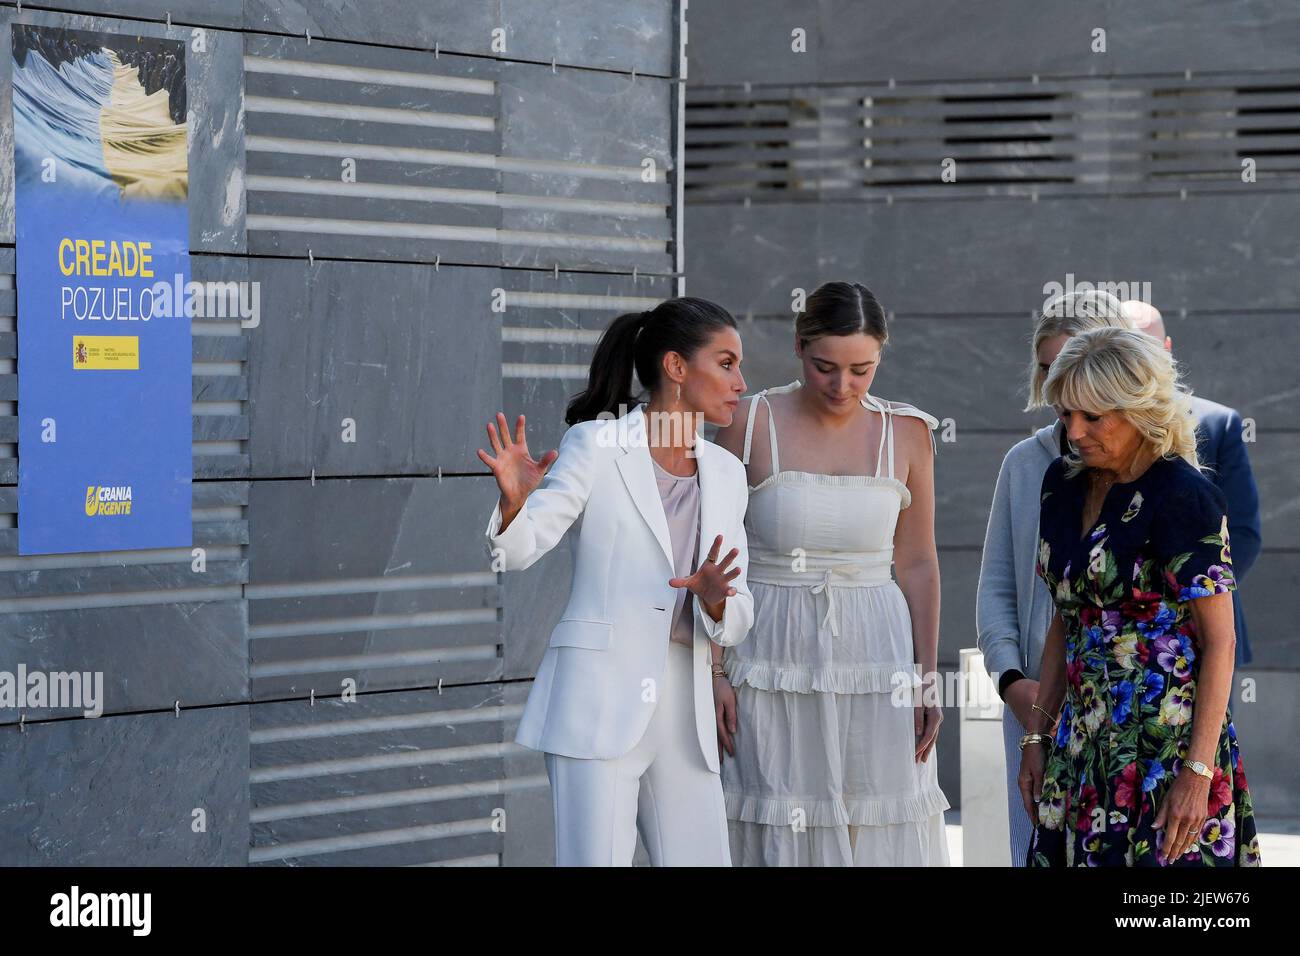 Spain's Queen Letizia welcomes U.S. first Lady Jill Biden and her granddaughters Finnegan and Maisy Biden, as they arrive for the visit of a reception centre for Ukrainian refugees in Pozuelo de Alarcon, on the sidelines of a NATO summit, near Madrid, Spain, June 28, 2022. Oscar del Pozo/Pool via REUTERS Stock Photo